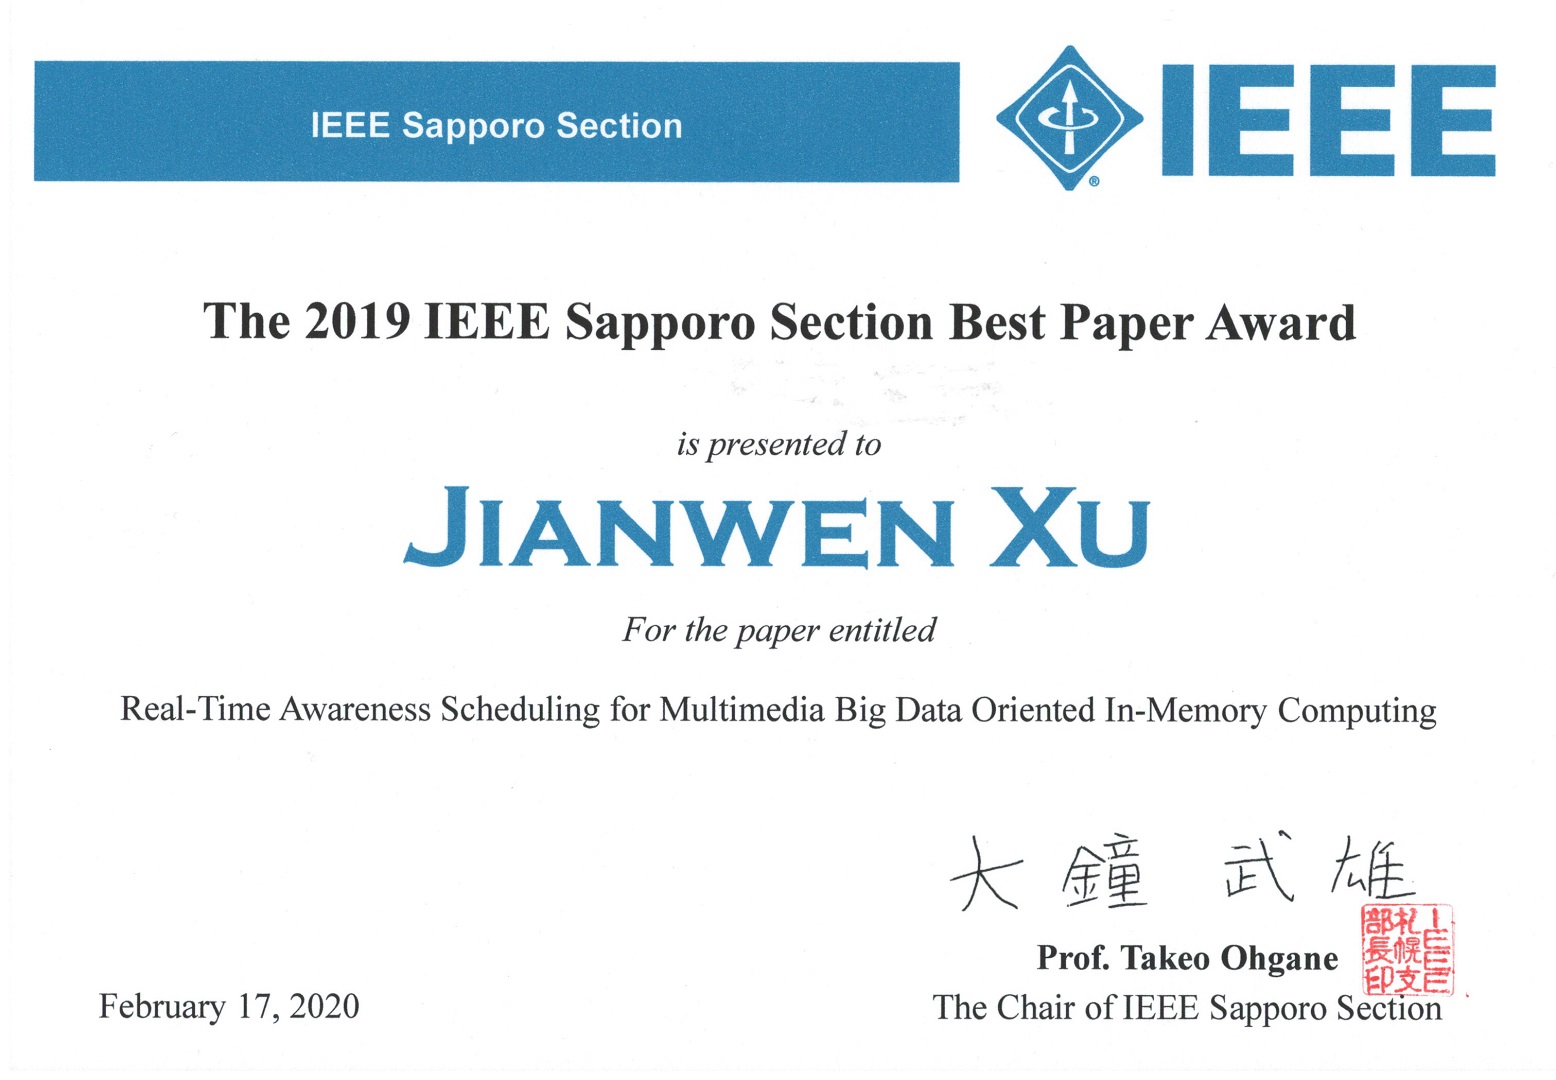 IEEE Sapporo Section Best Paper Award